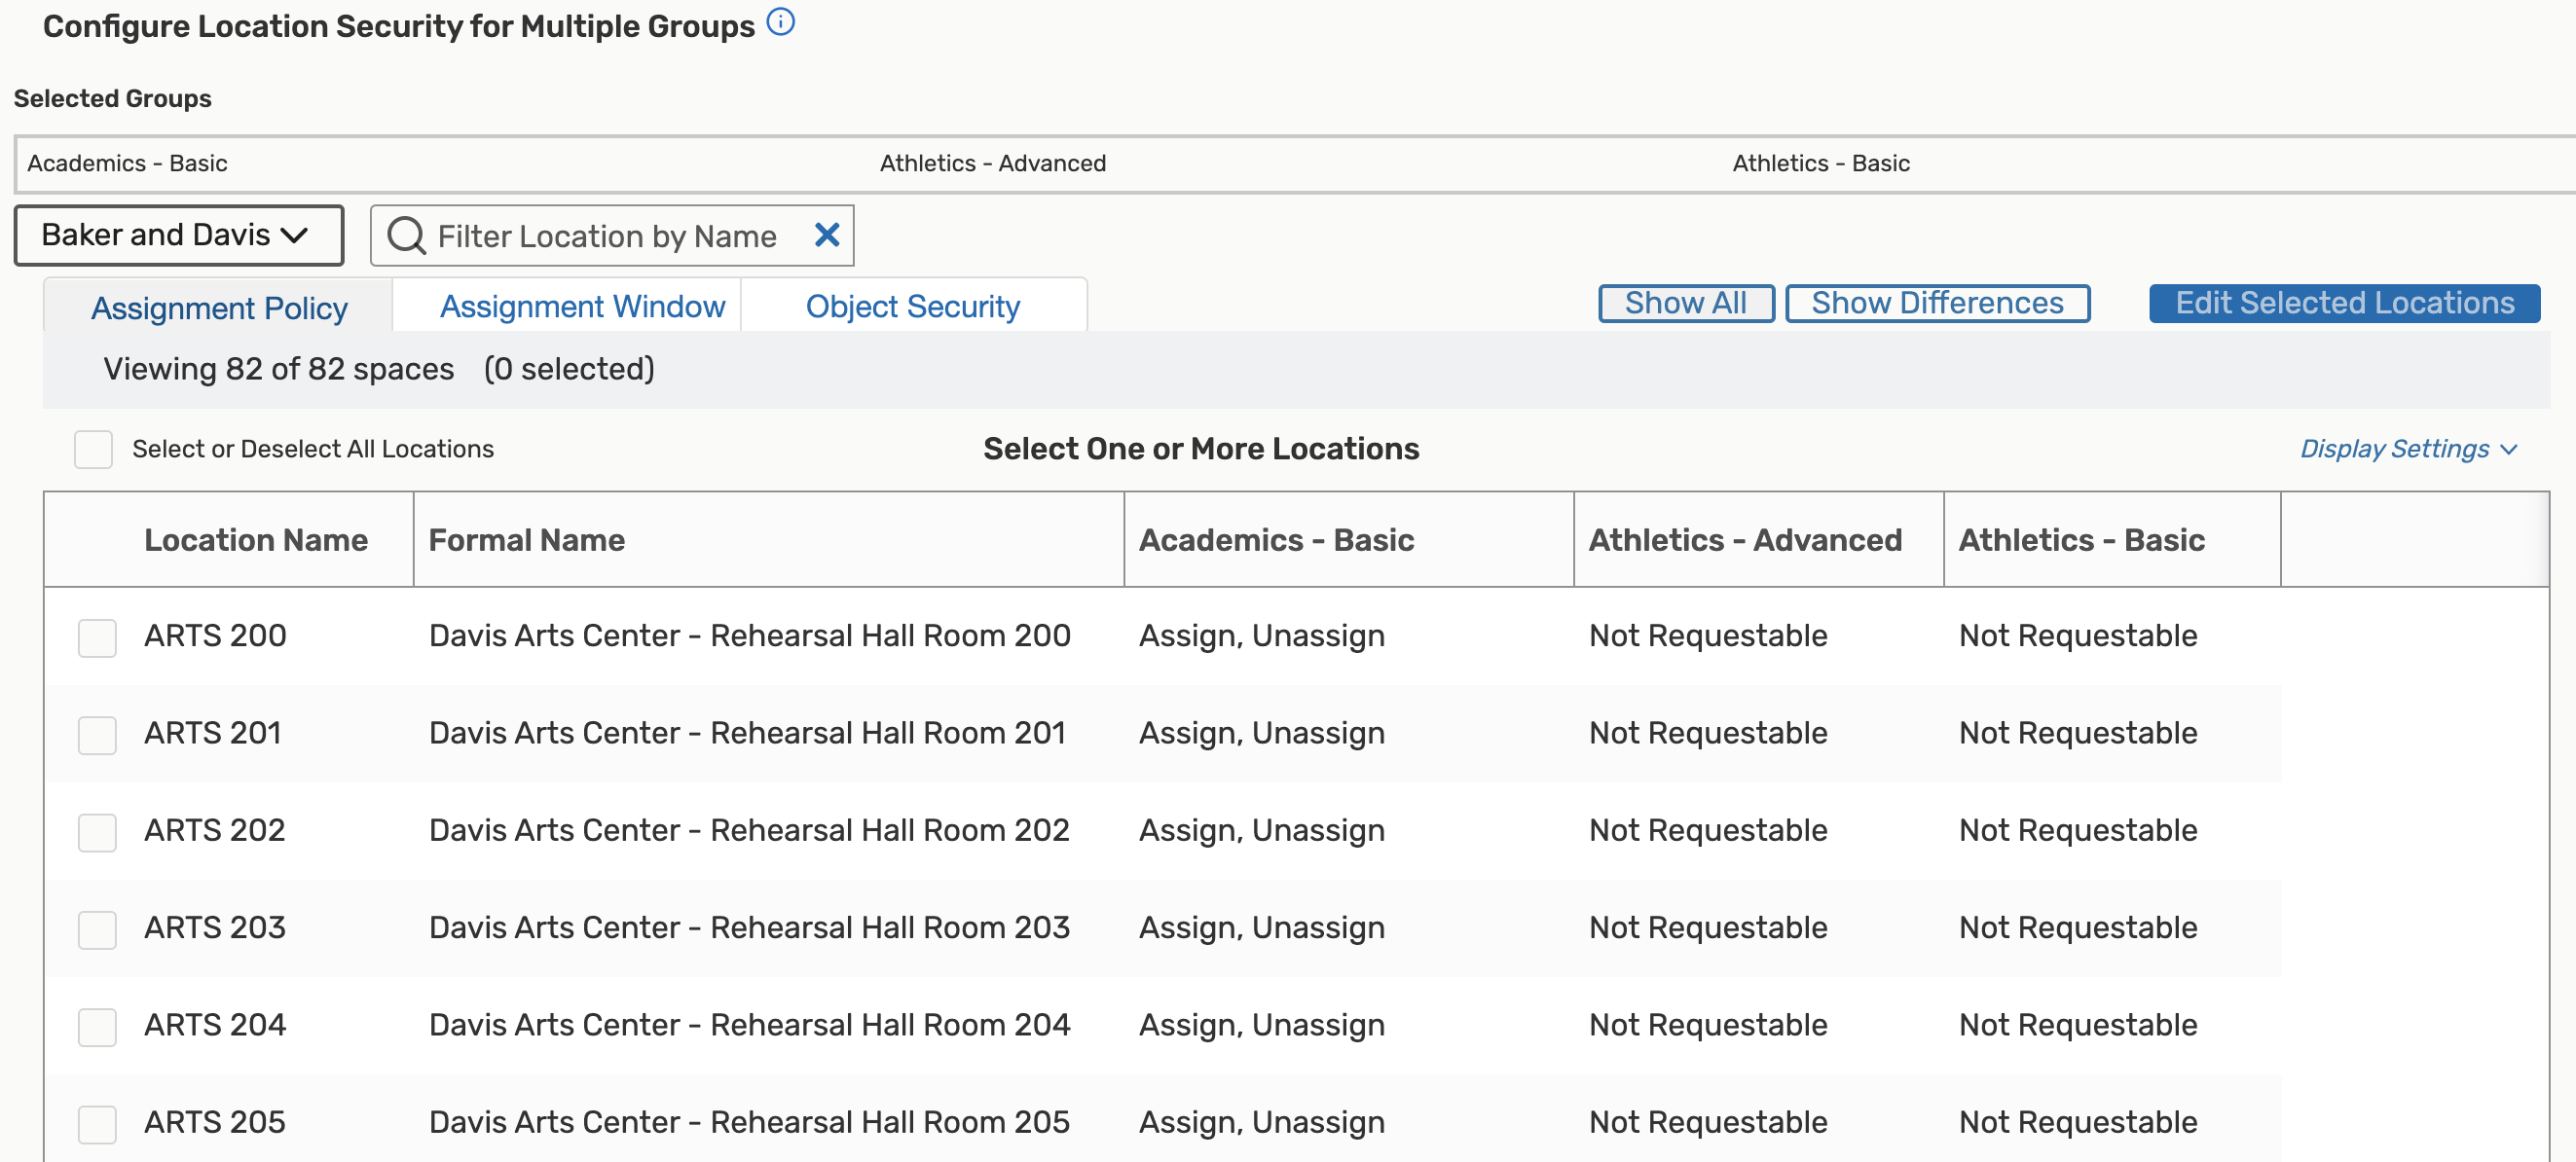 Configure Location Security for Multiple Groups options.